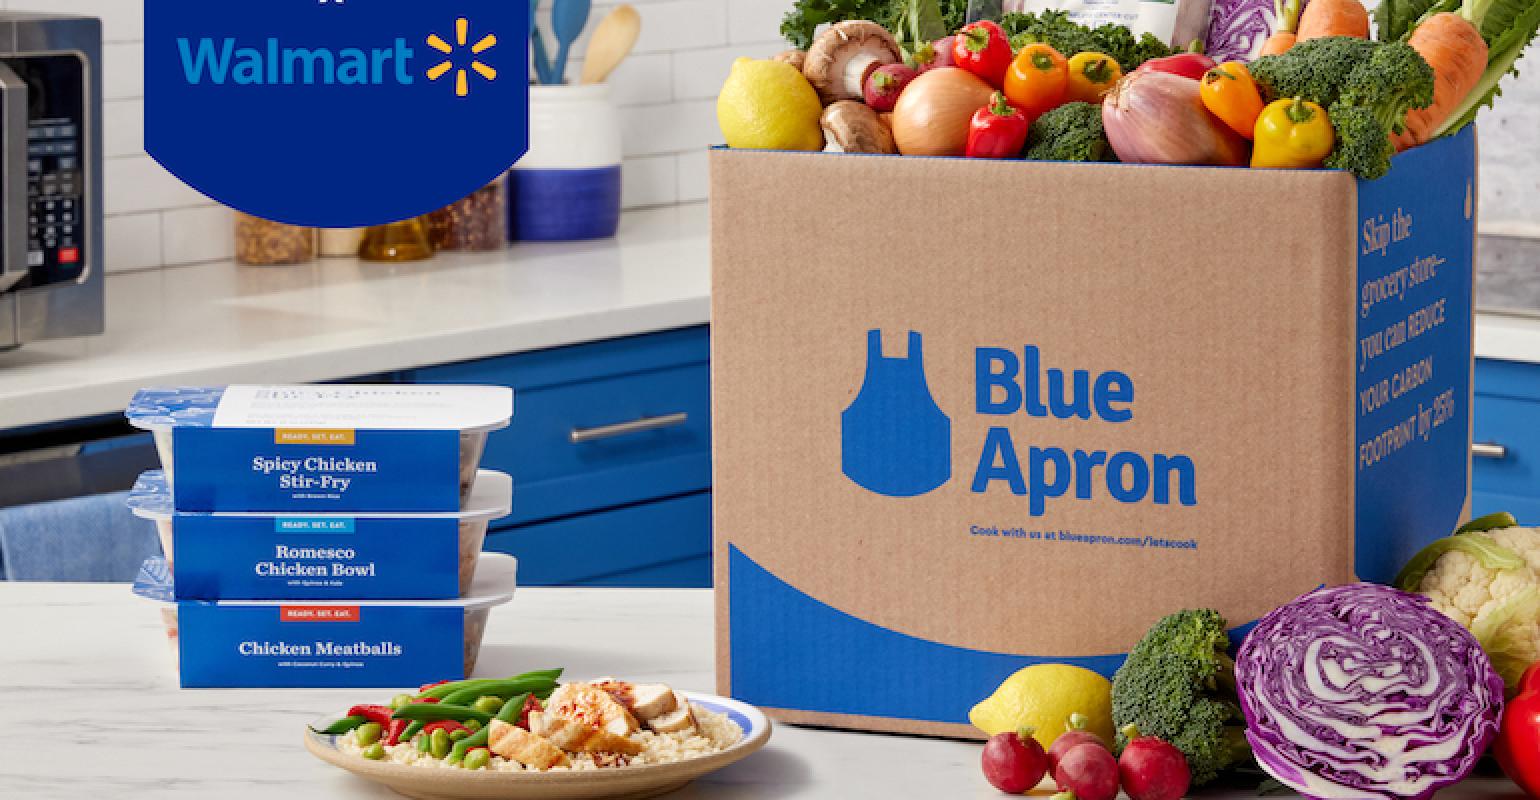 Blue Apron unlocks access to meal kits in Walmart collaboration